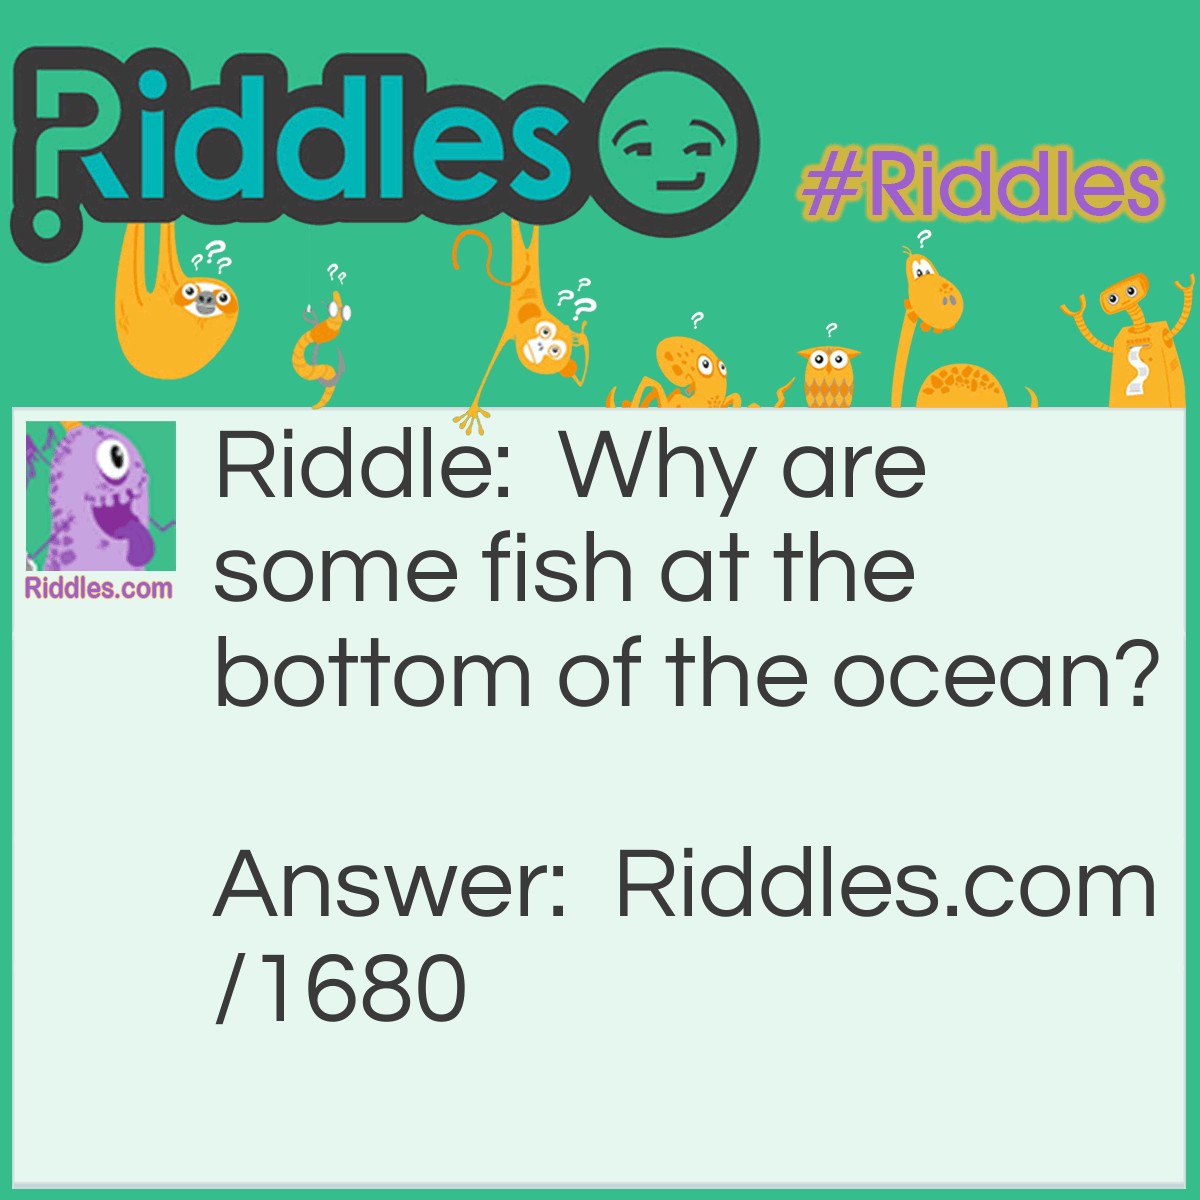 Riddle: Why are some fish at the bottom of the ocean? Answer: Because they dropped out of school!